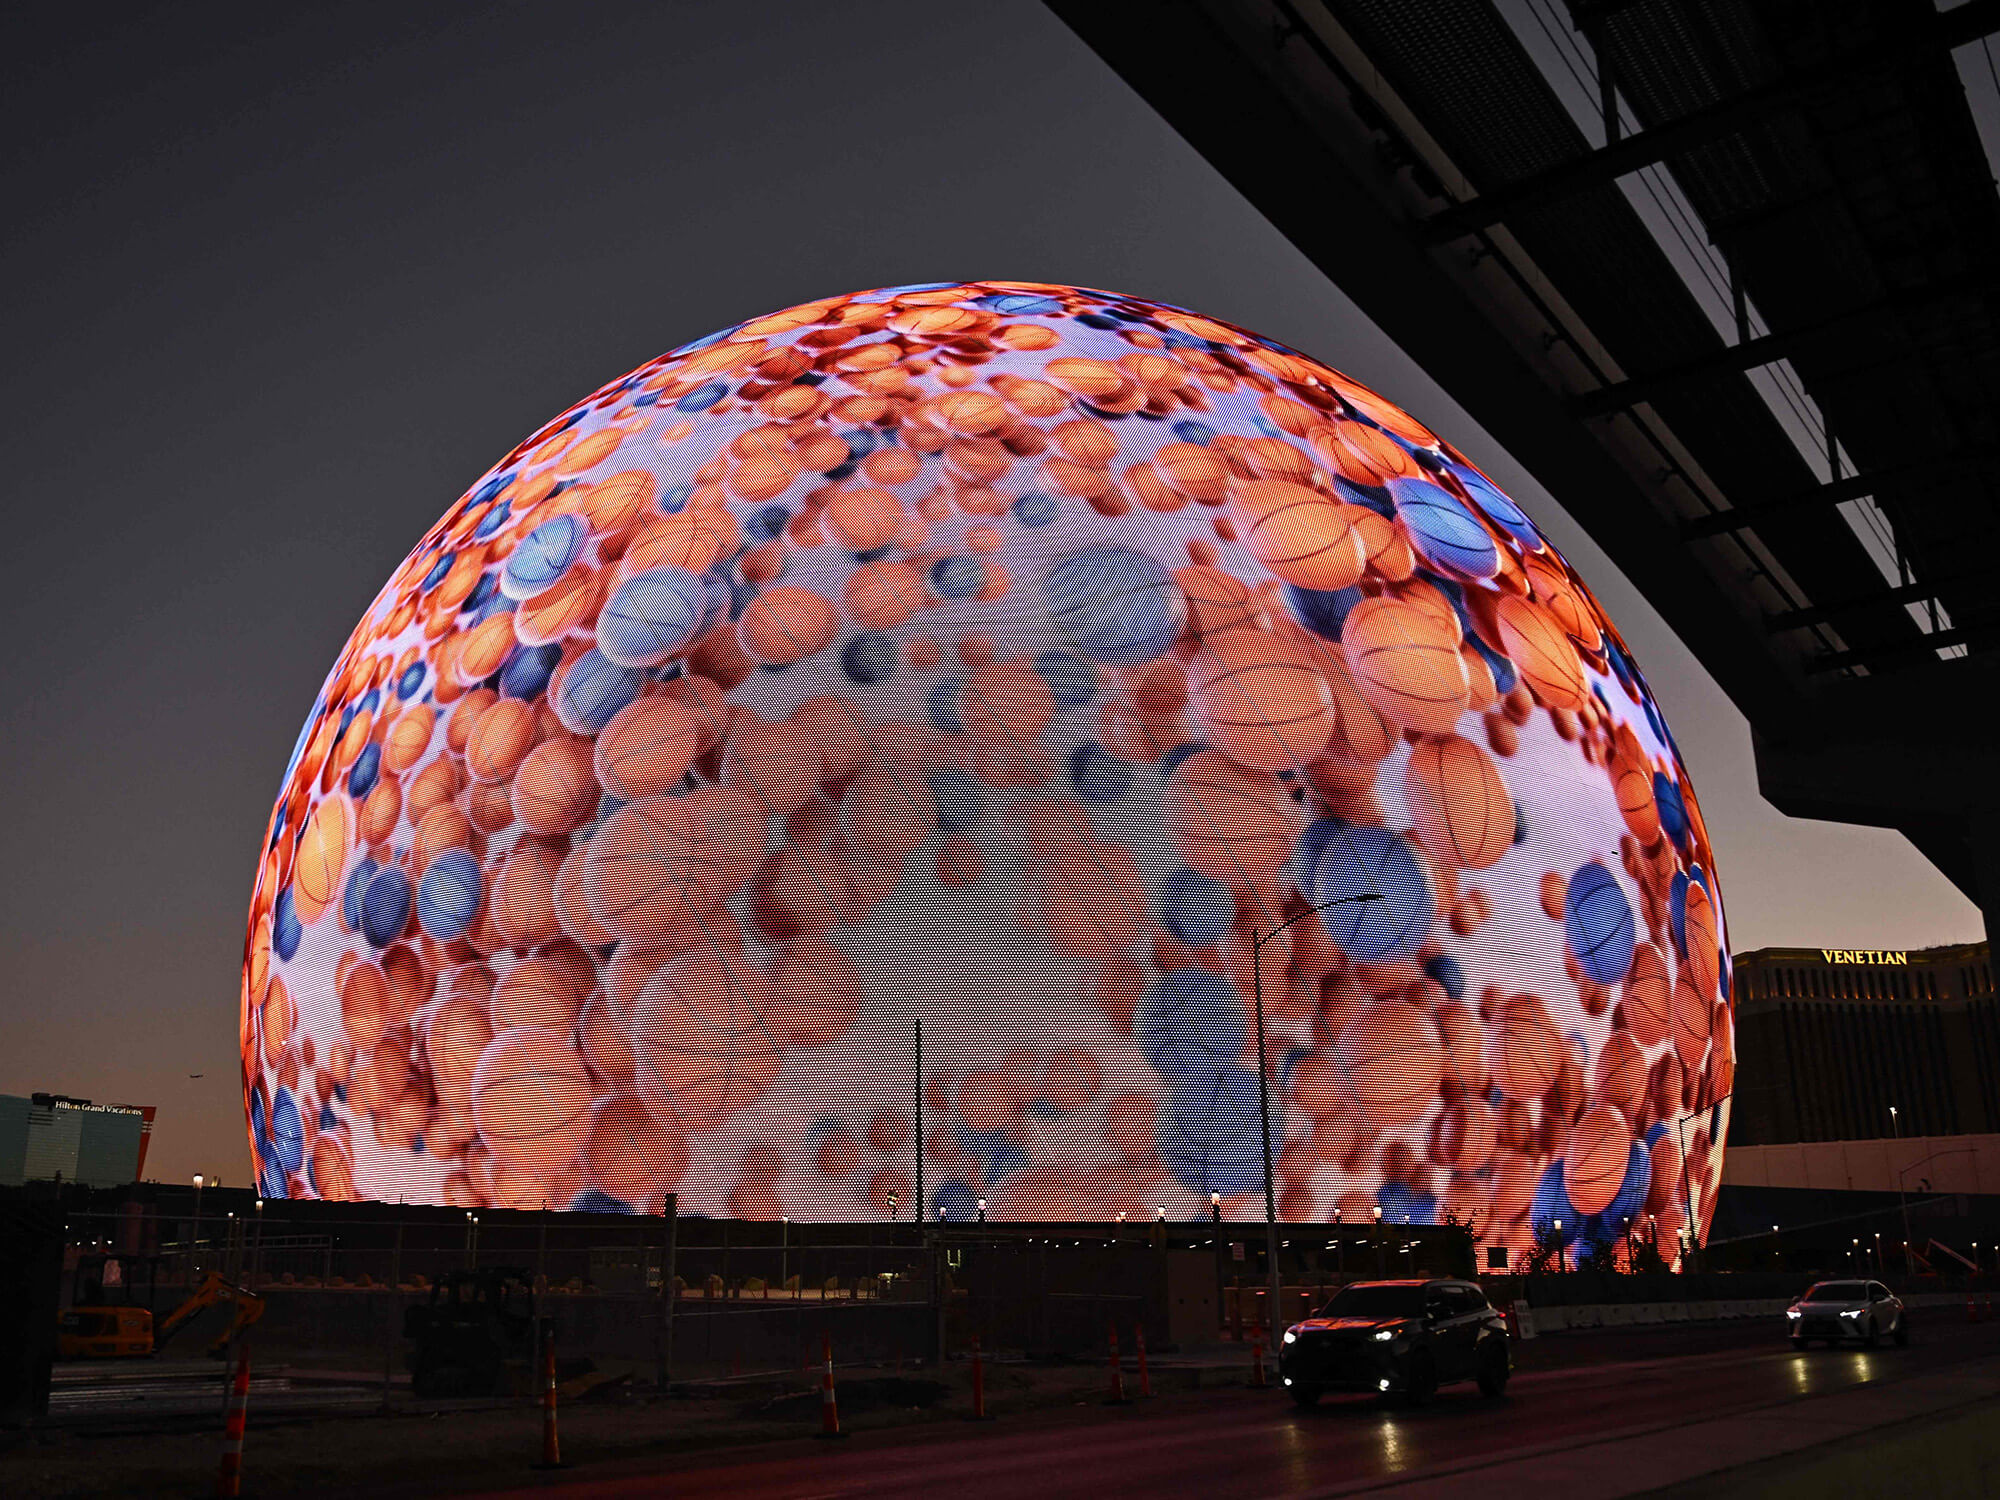 The Sphere illuminated with an image of lots of basketballs.